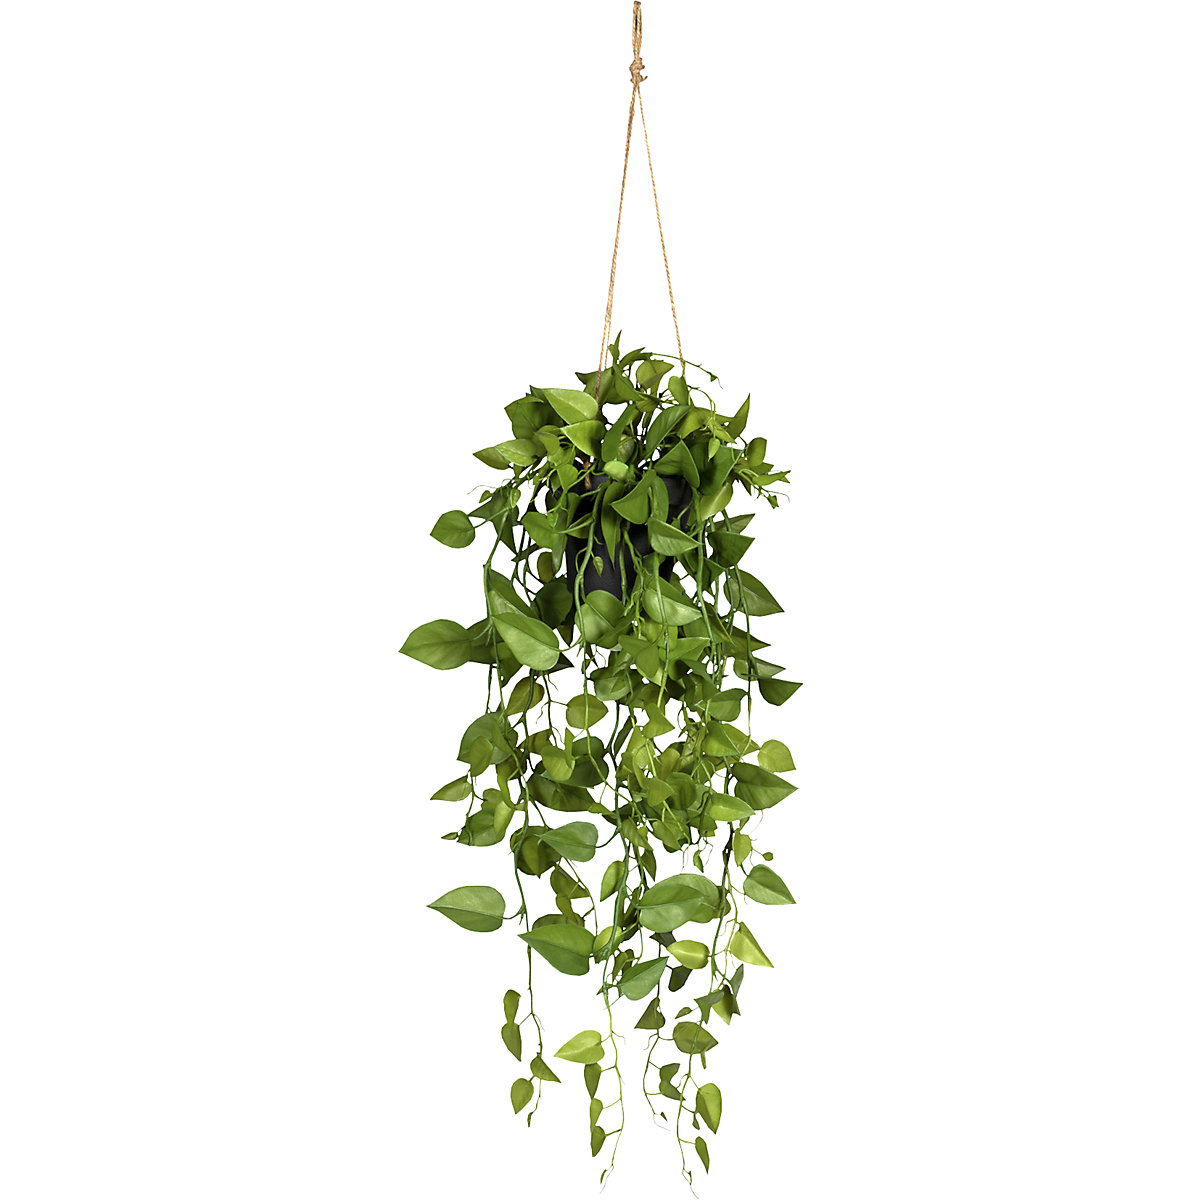 Hanging philodendron